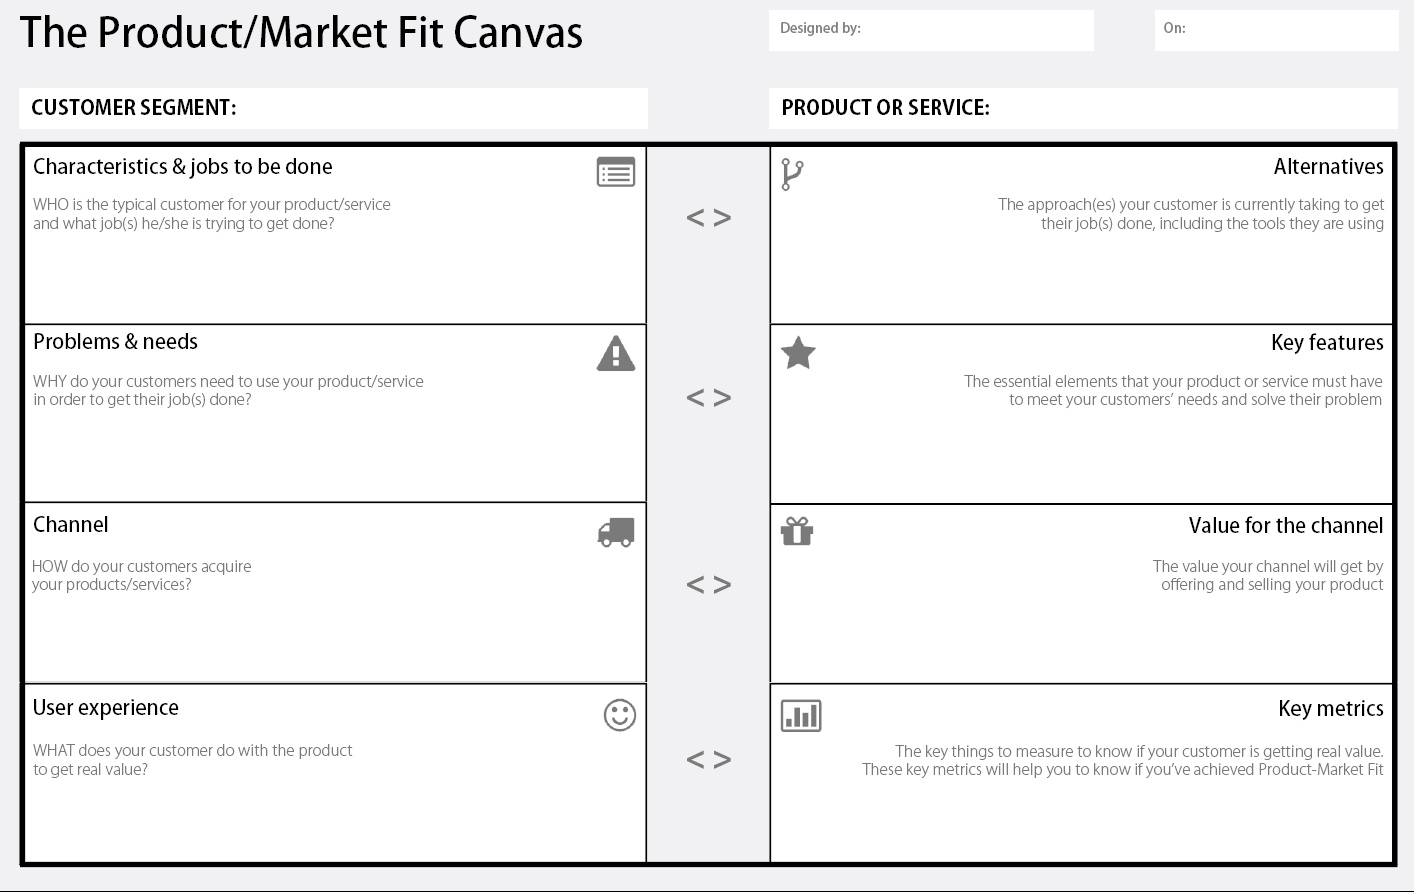 The Product/Market Fit Canvas